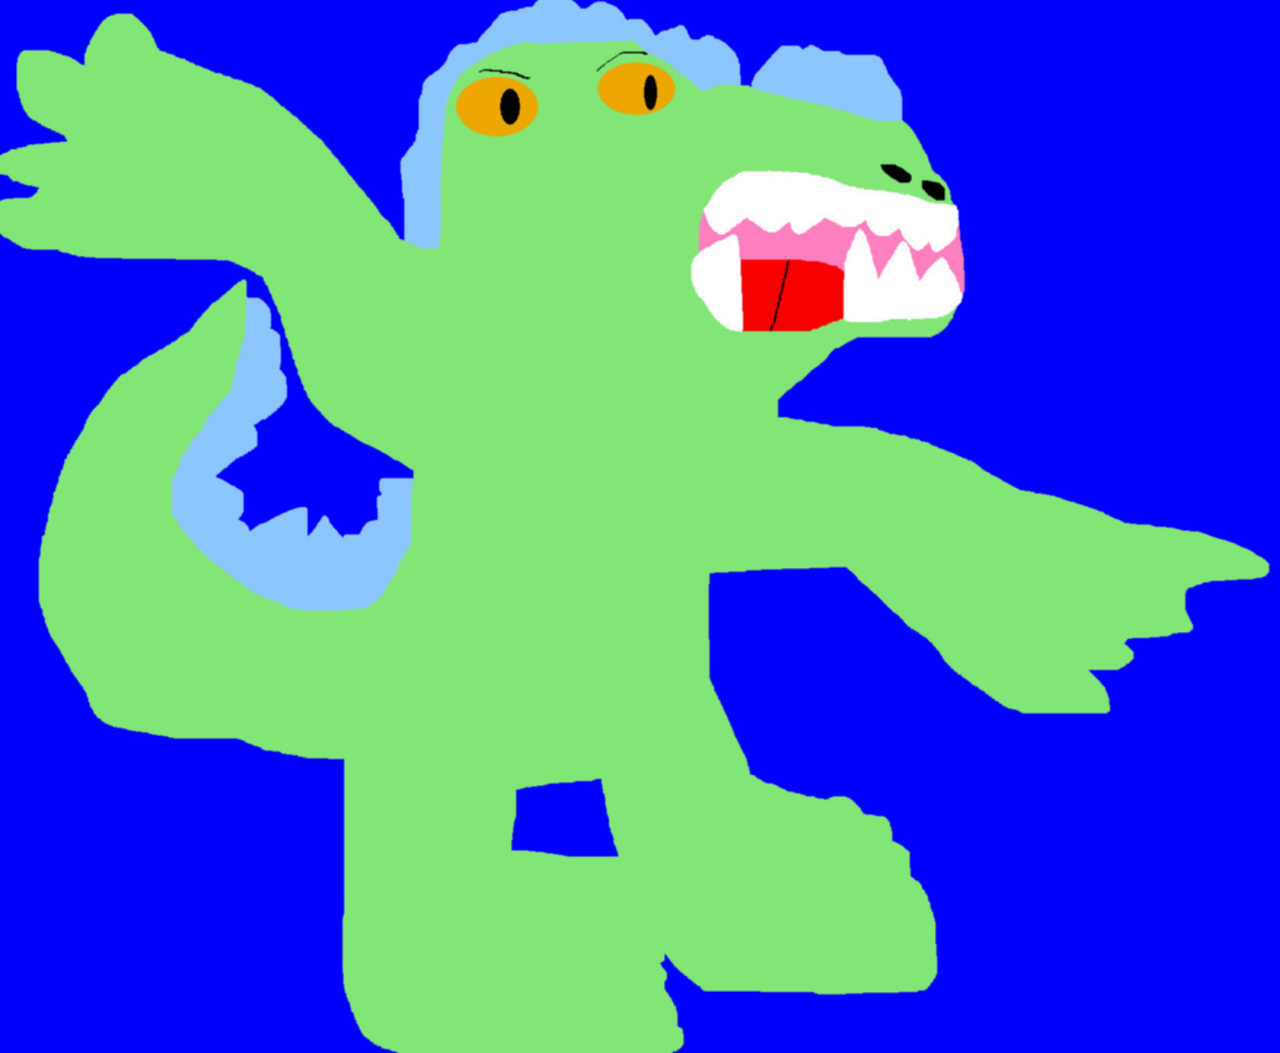 Reptar Costume Minus Noodman And Altered Face MS Paint by Falconlobo